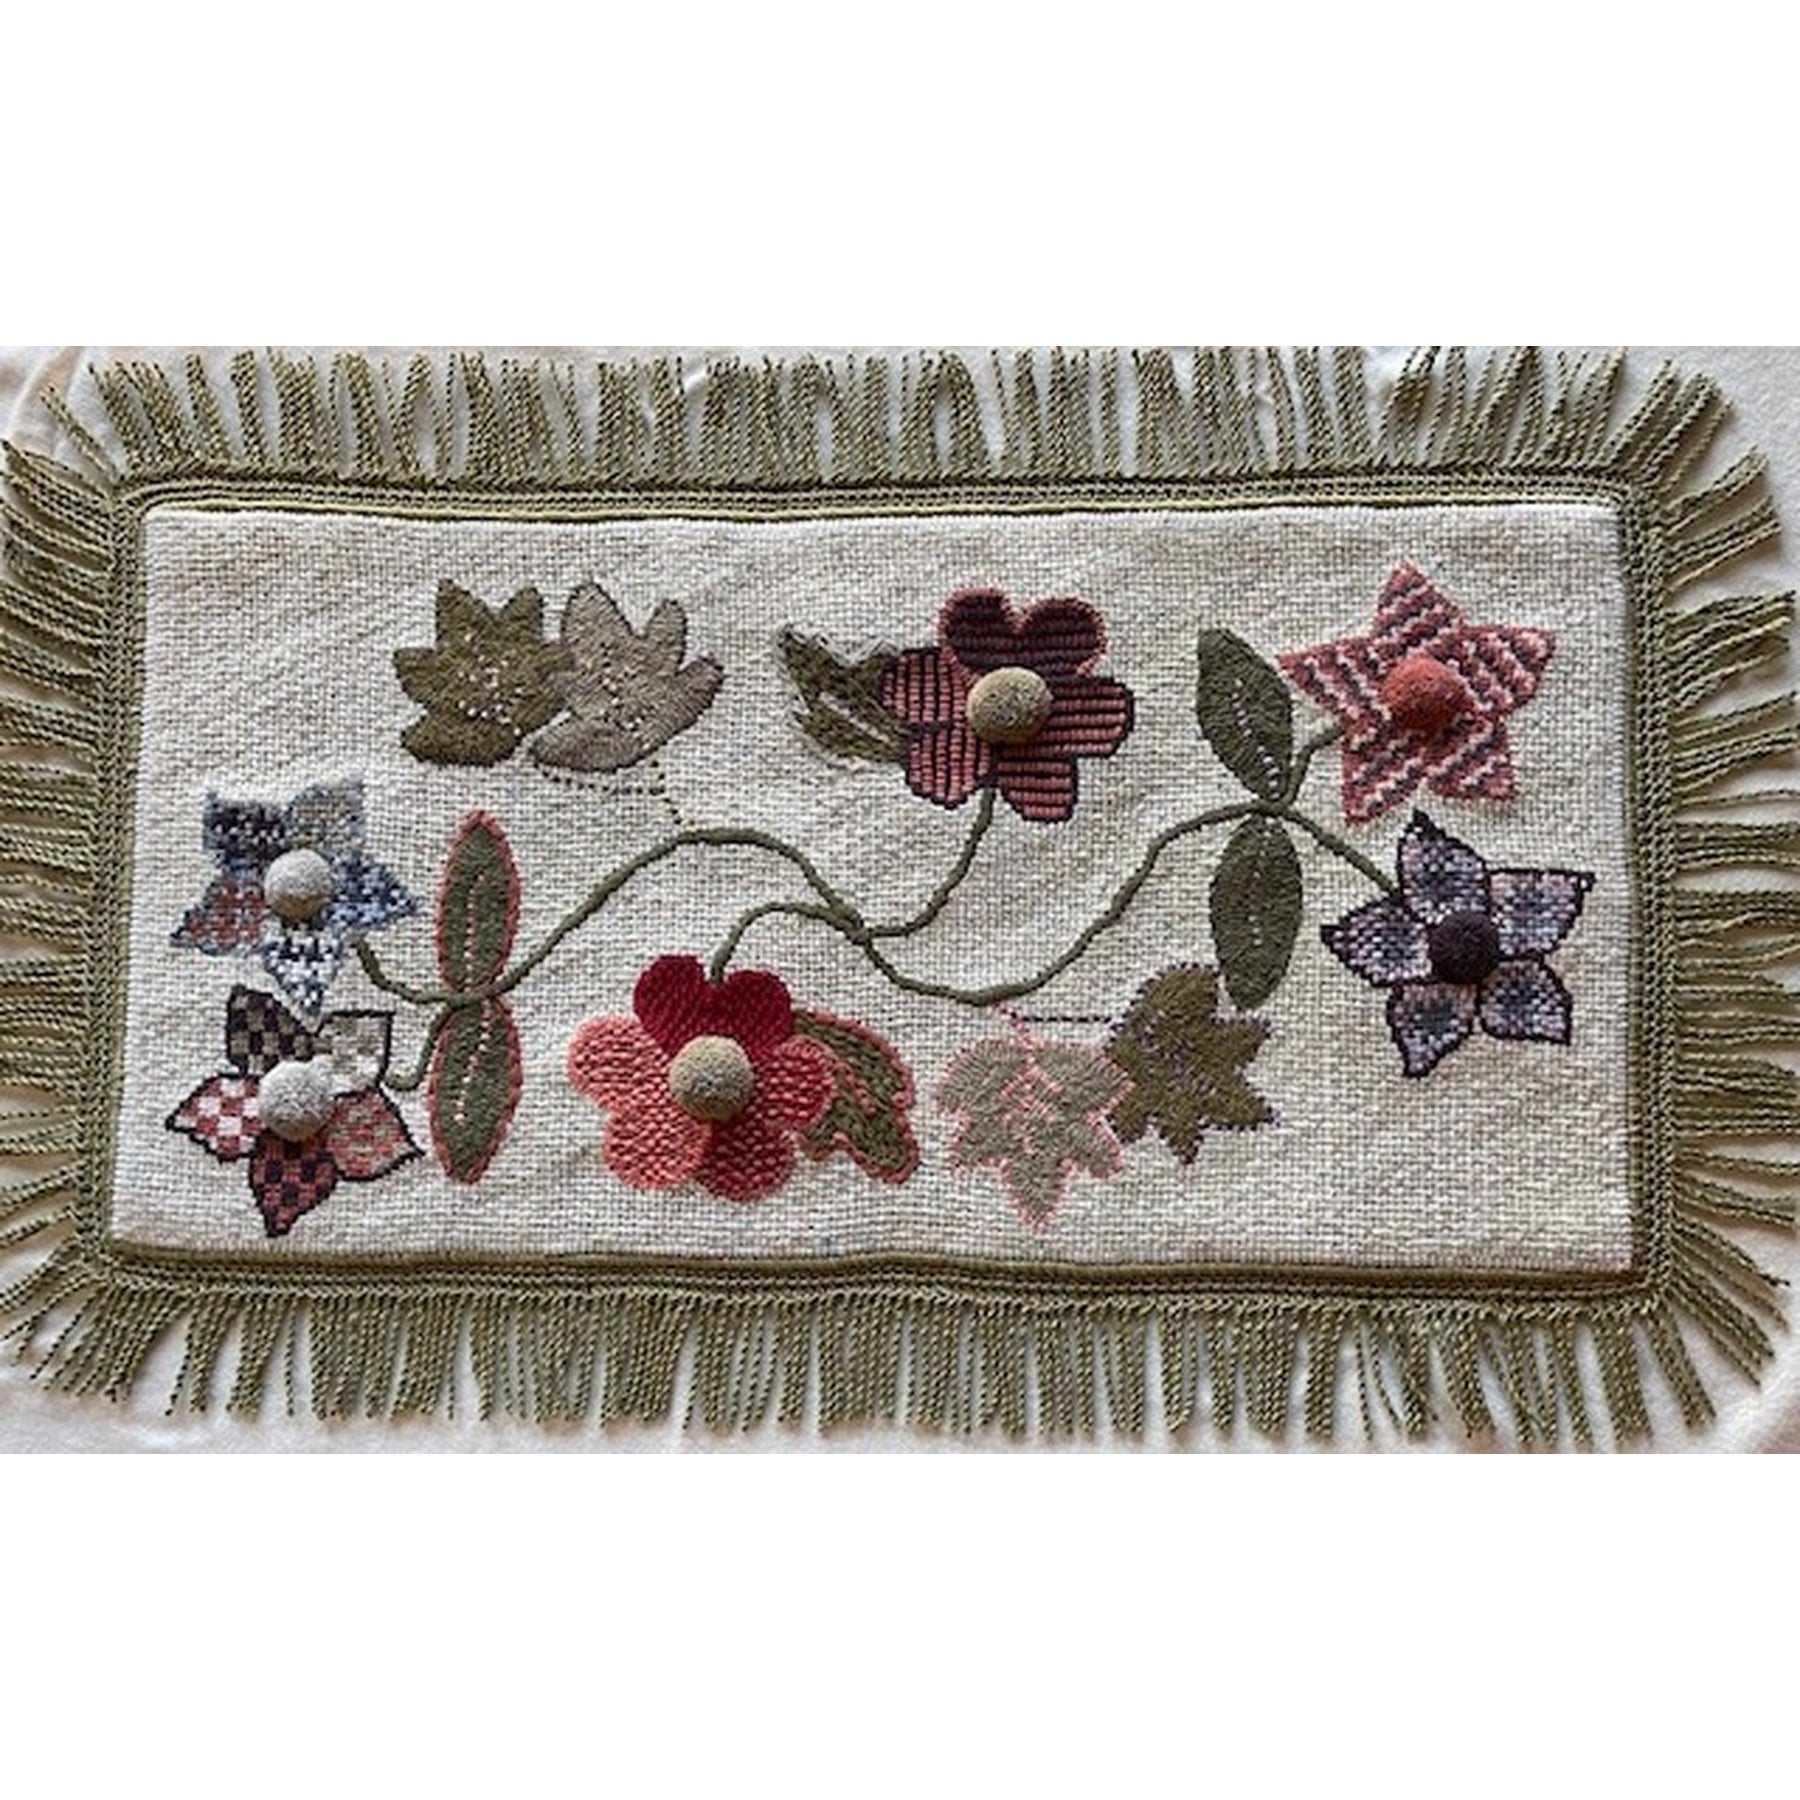 Primitive Floral Rug Runner - Small, rug hooked by Marianne Relka